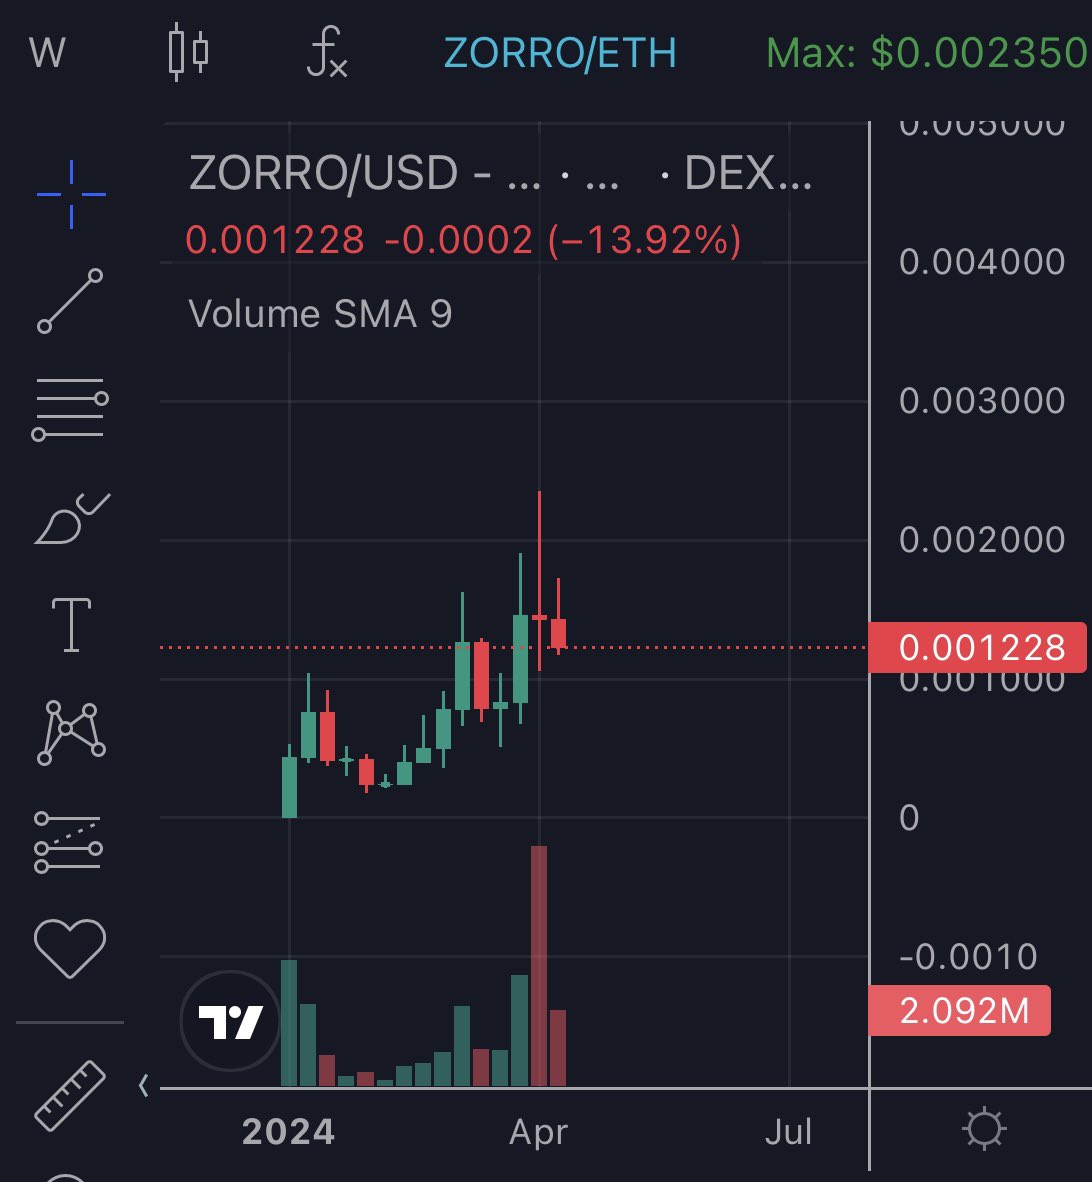 do we think zksync memes catch a bid post airdrop? I think there is a solid chance and I’m trying to front run the liquidity injection from what will likely be the biggest airdrop in crypto history swapped all eth I was using to farm into $ZORRO chart looks great & the cat